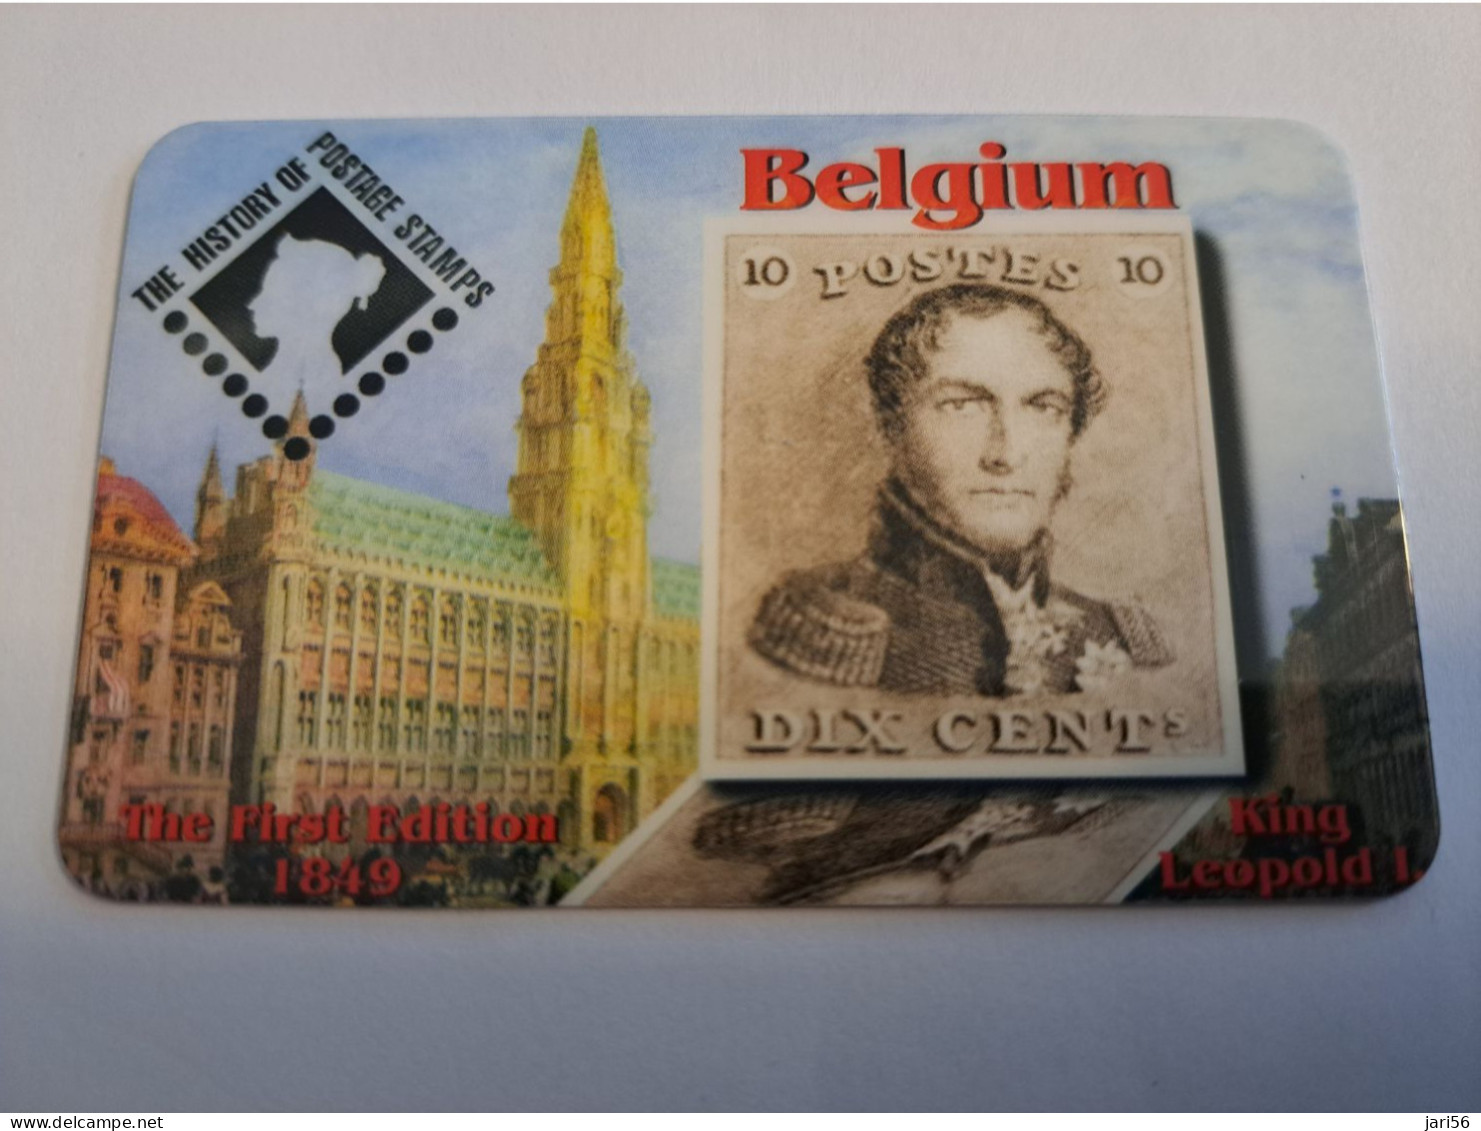 GREAT BRITAIN /20 UNITS /BELGIUM   1849 FIRST EDITION   / DATE 09/99 PREPAID CARD / LIMITED EDITION/ MINT  **15923** - [10] Colecciones